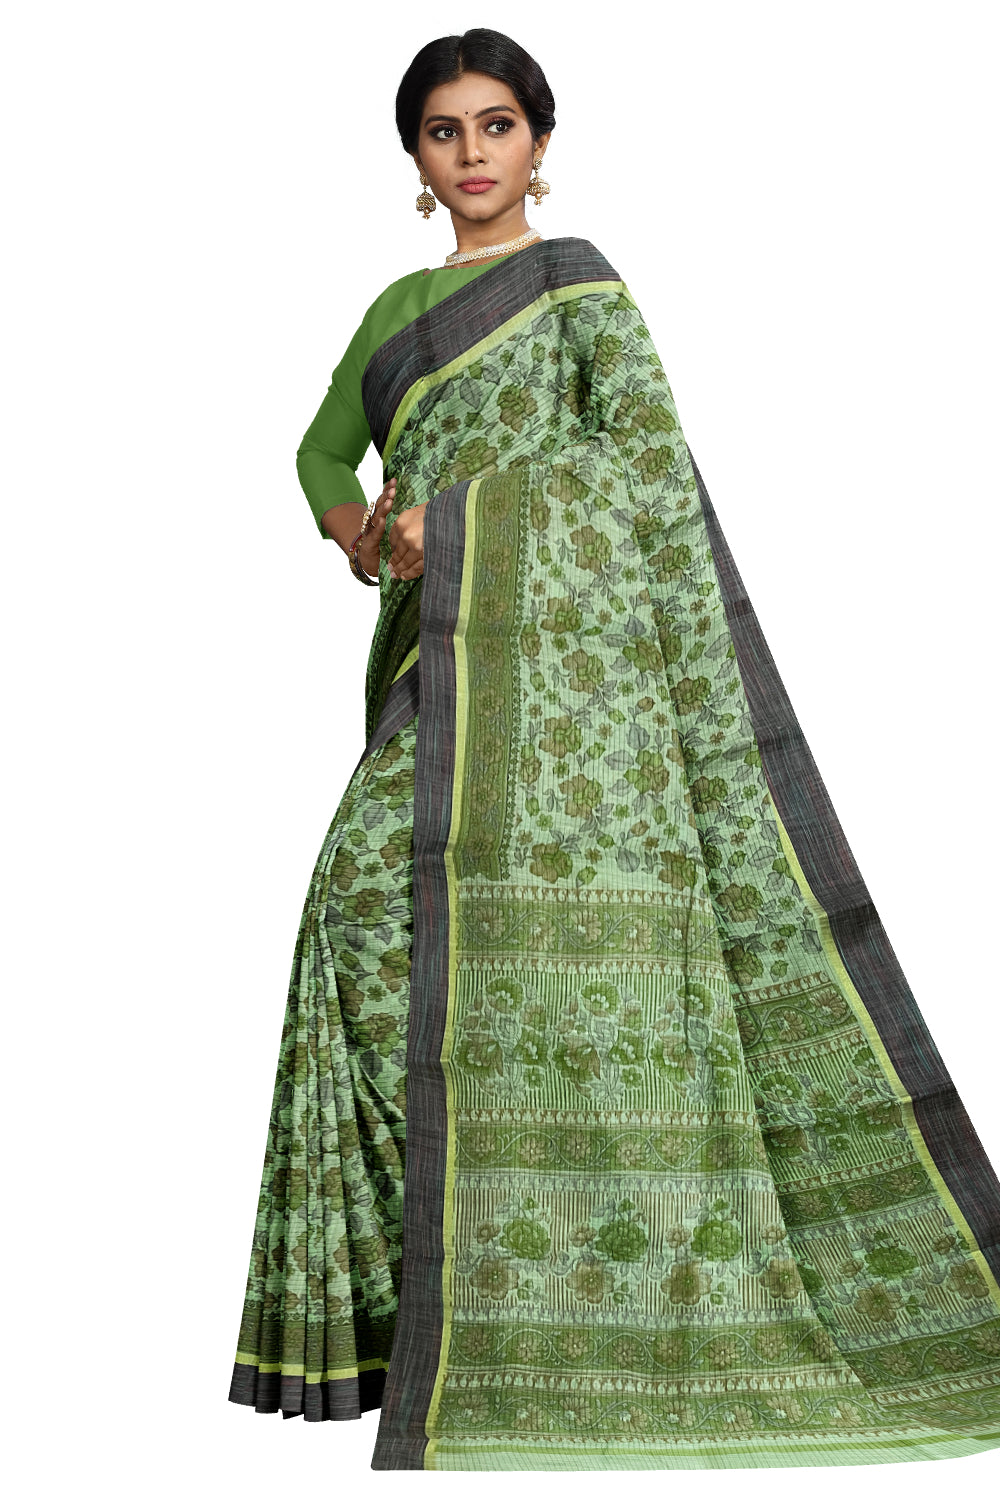 Southloom Cotton Green Floral Printed Saree